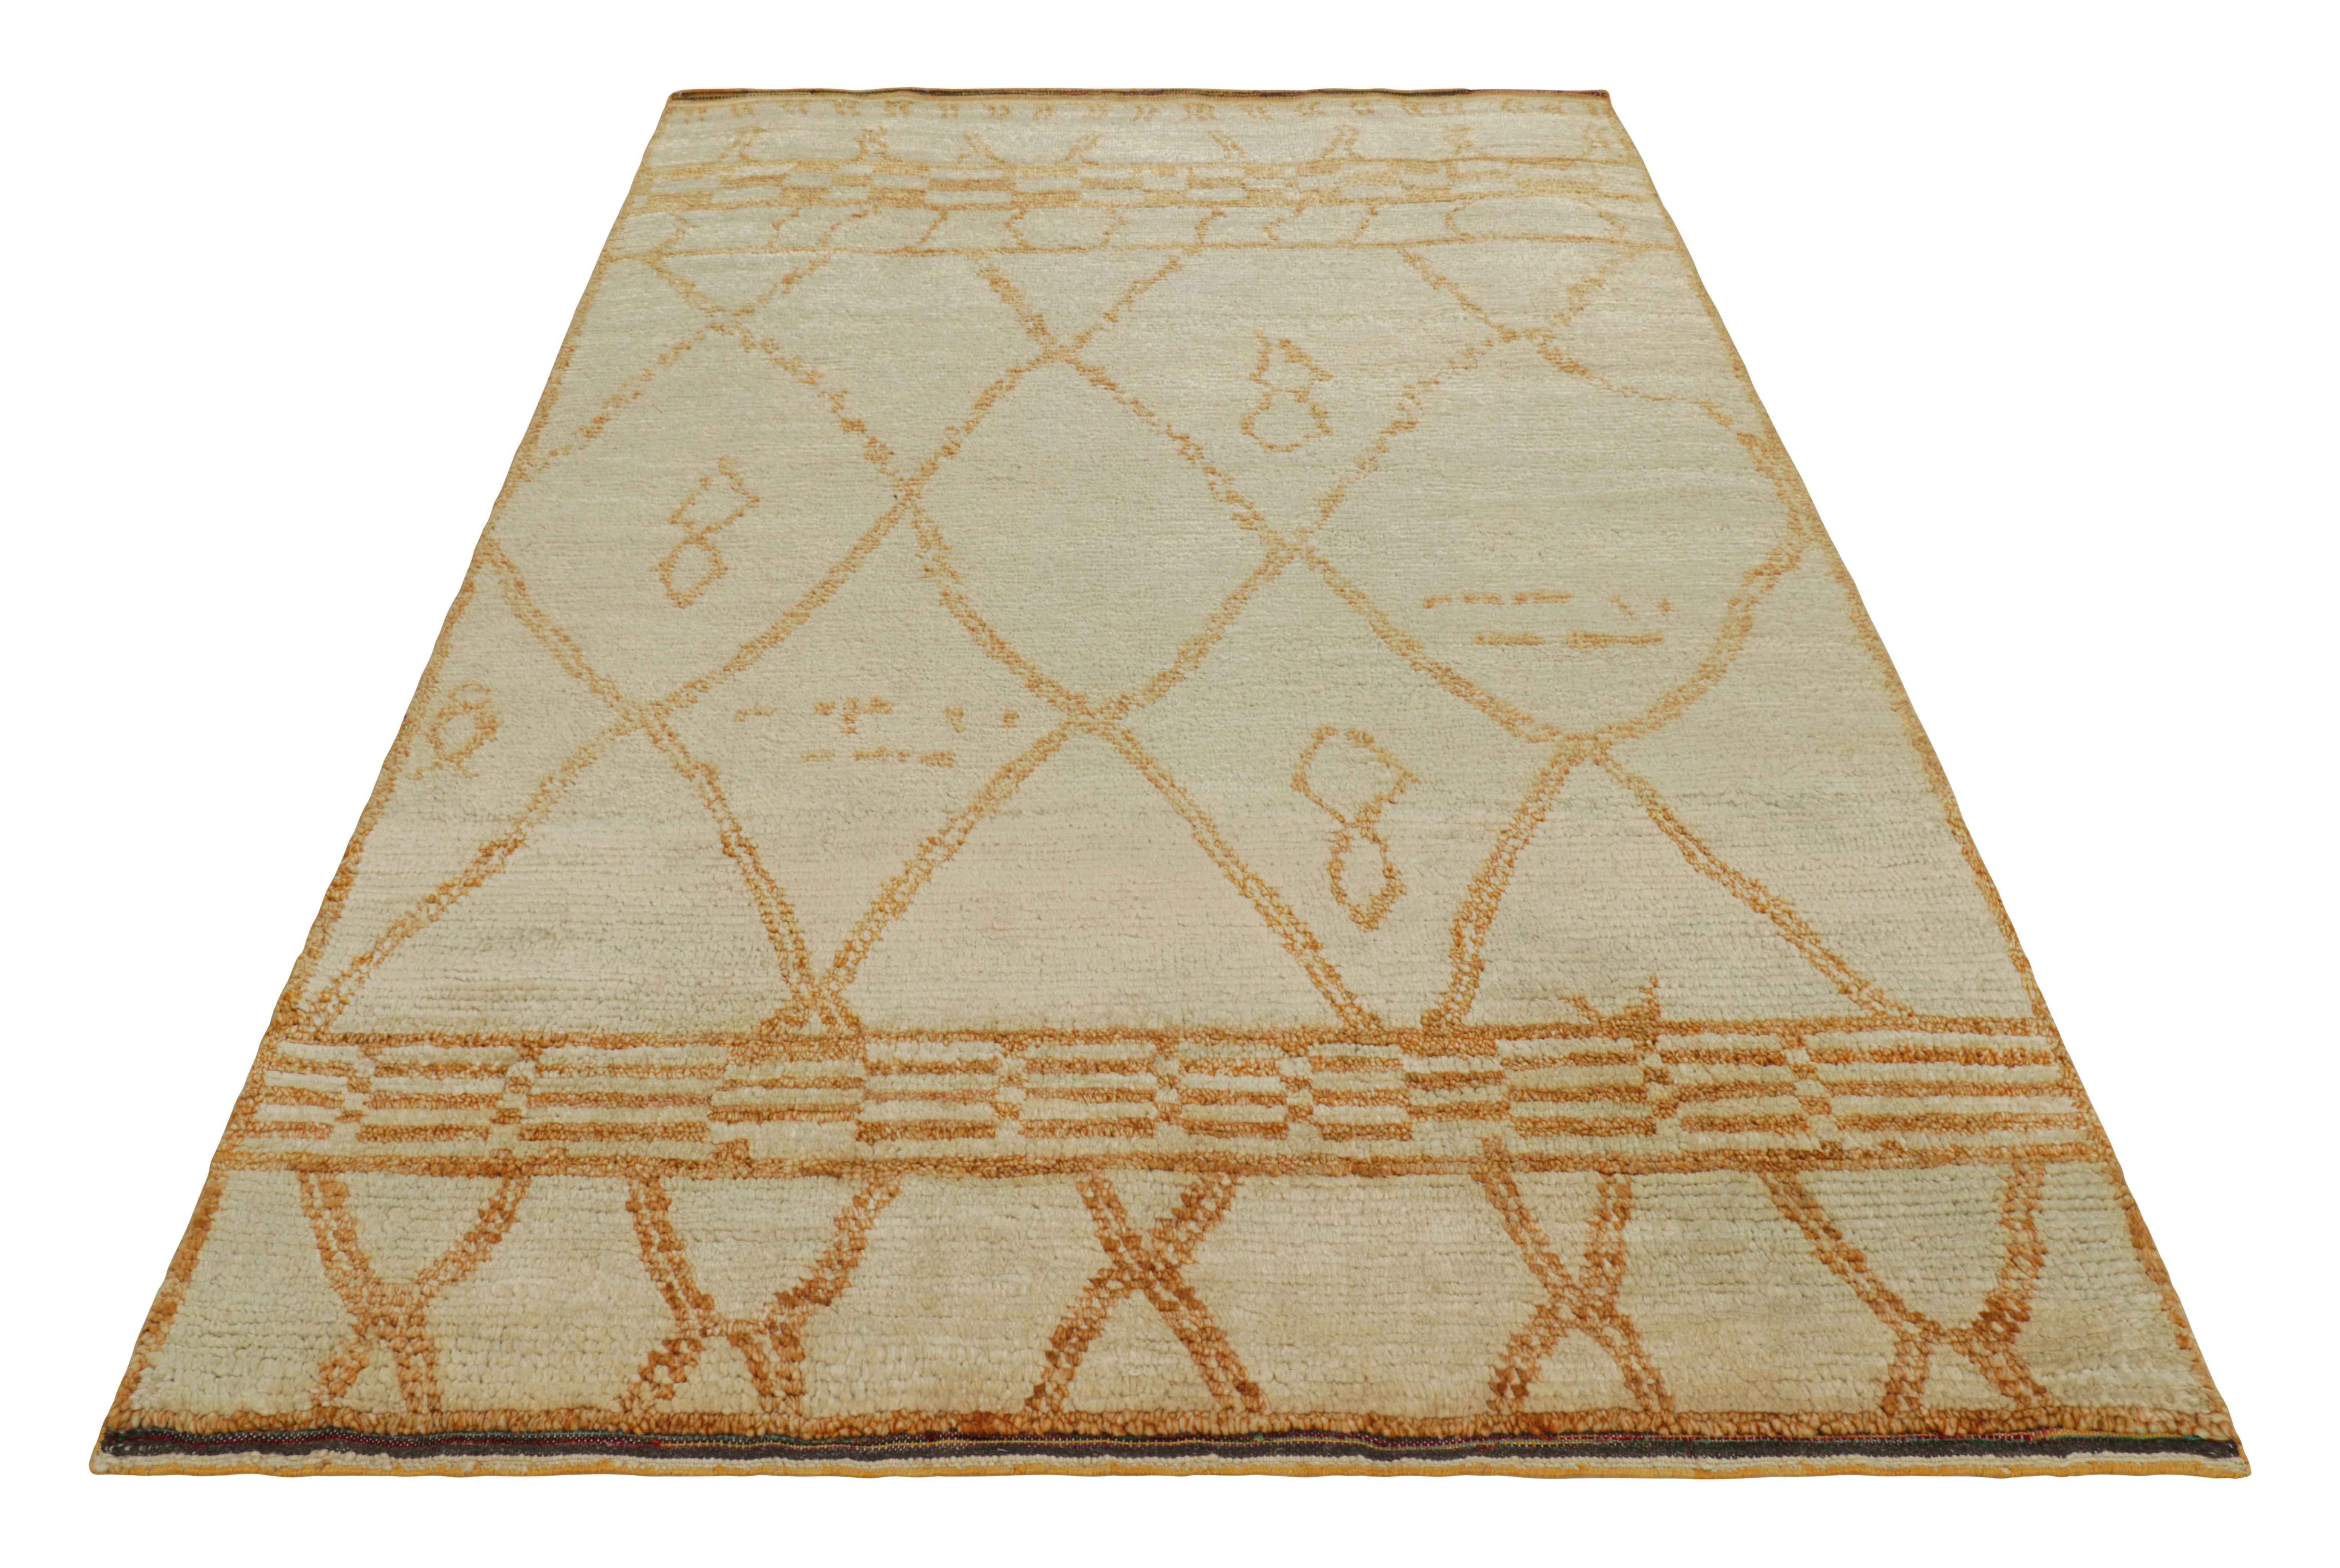 Hand-Knotted Rug & Kilim’s Moroccan Style Rug in Cream with Orange Geometric Patterns For Sale